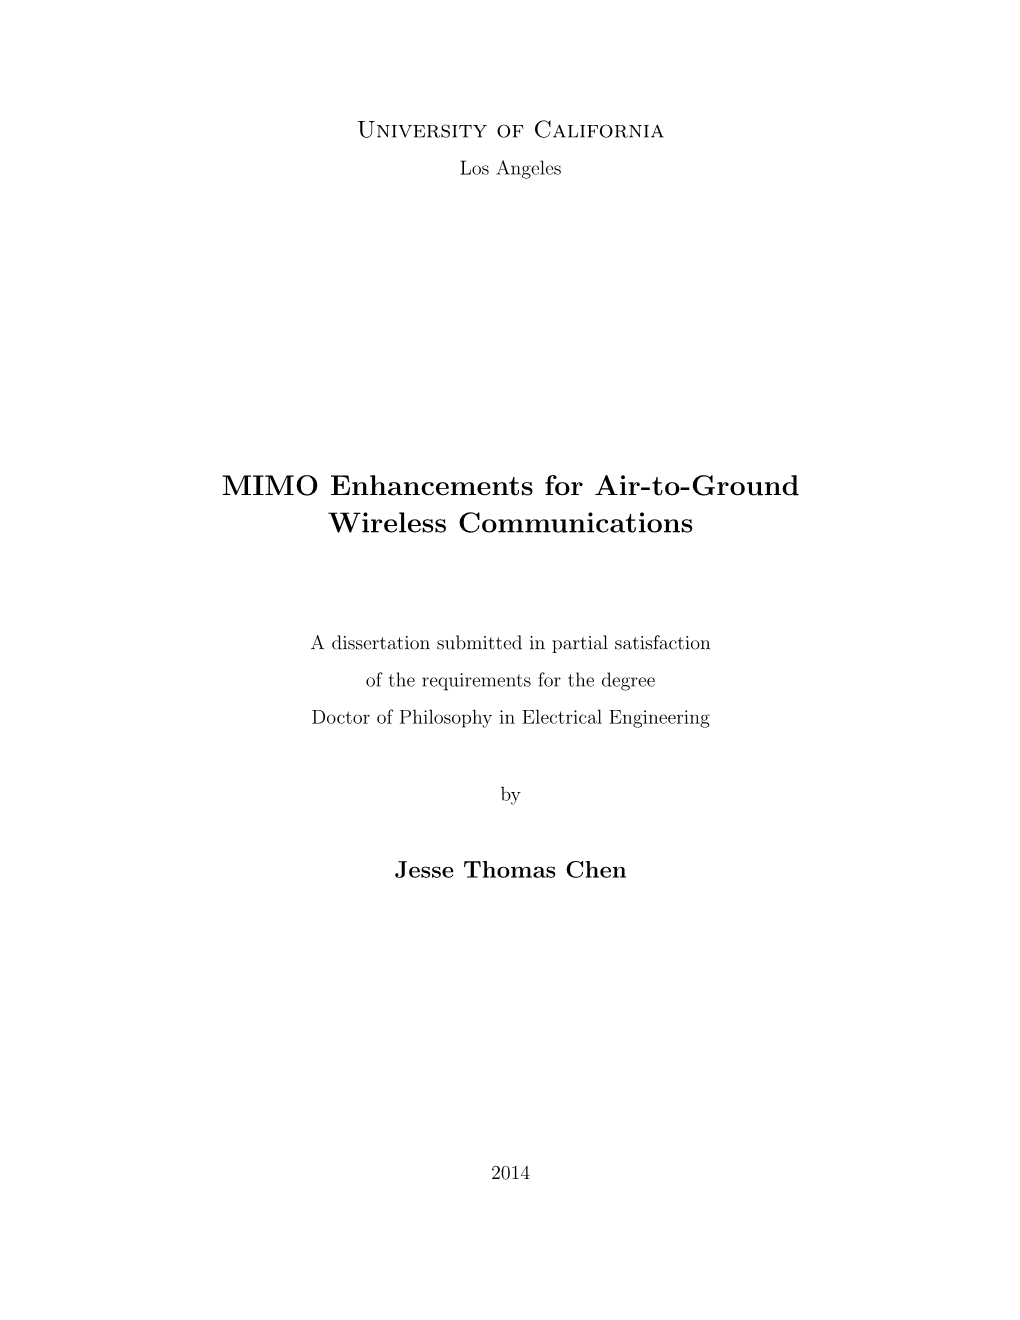 MIMO Enhancements for Air-To-Ground Wireless Communications